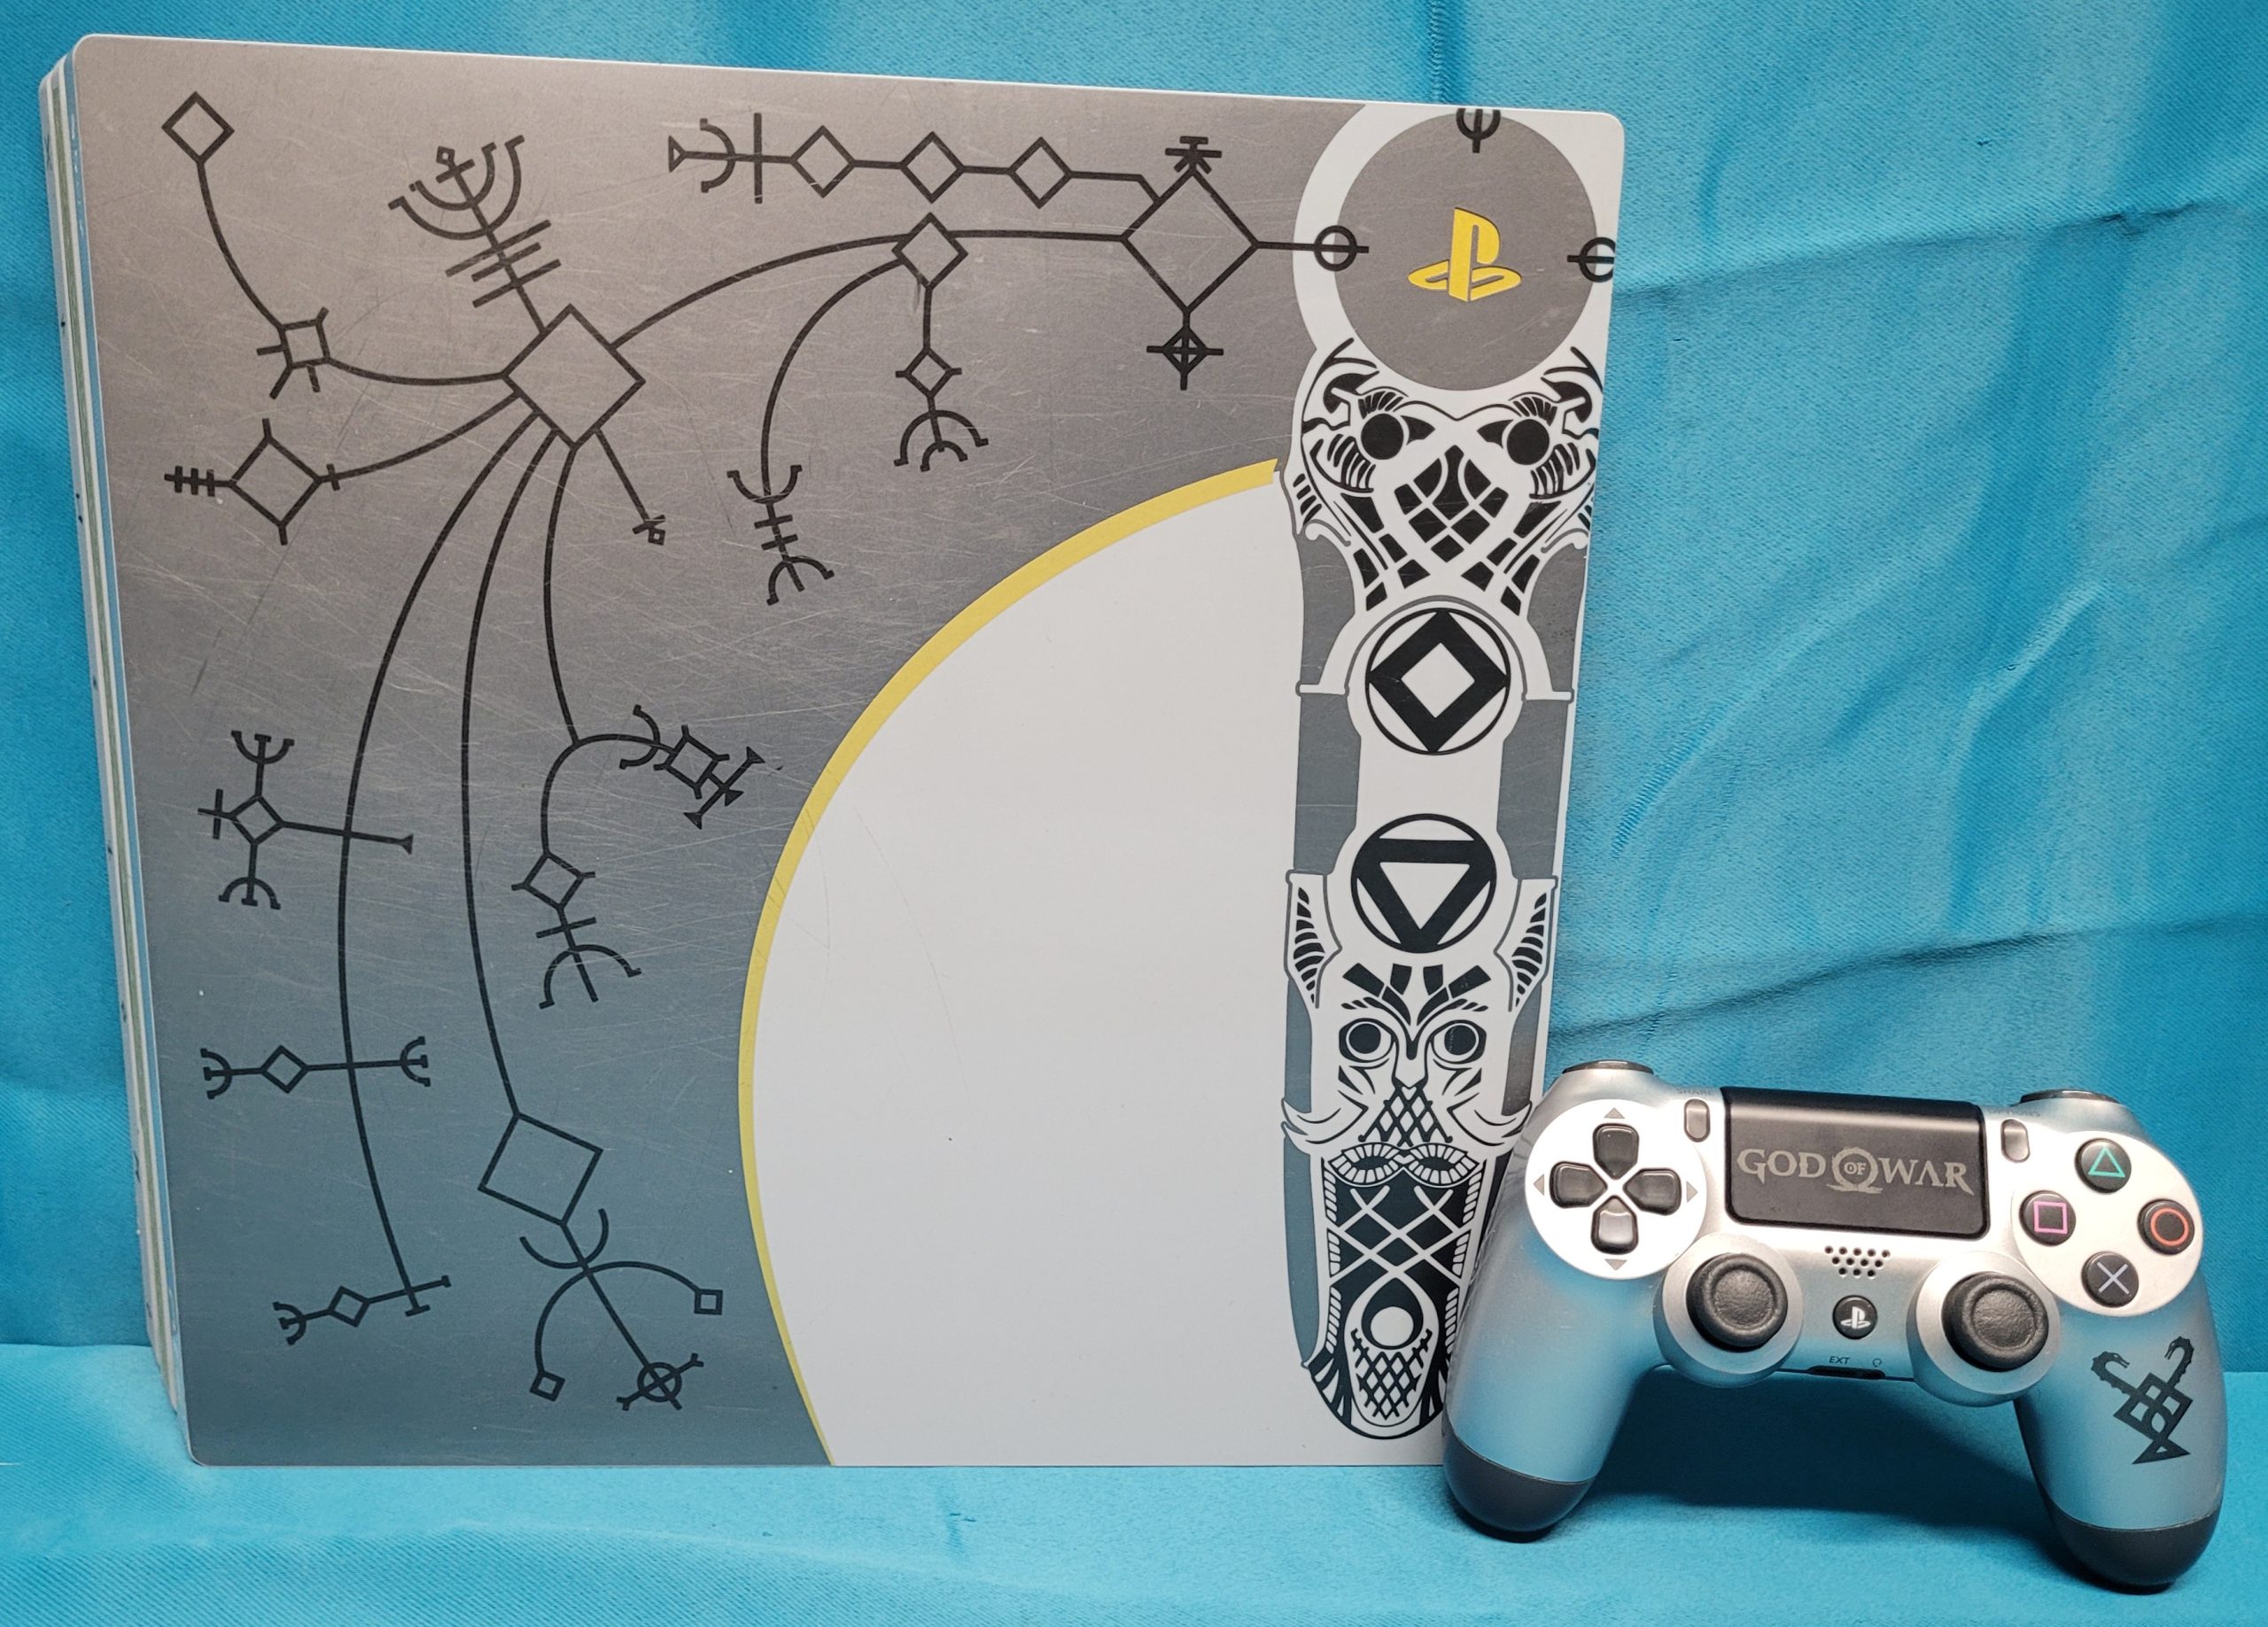 PlayStation 4 Pro 1TB HDD [God of War Limited Edition] - Bitcoin &  Lightning accepted